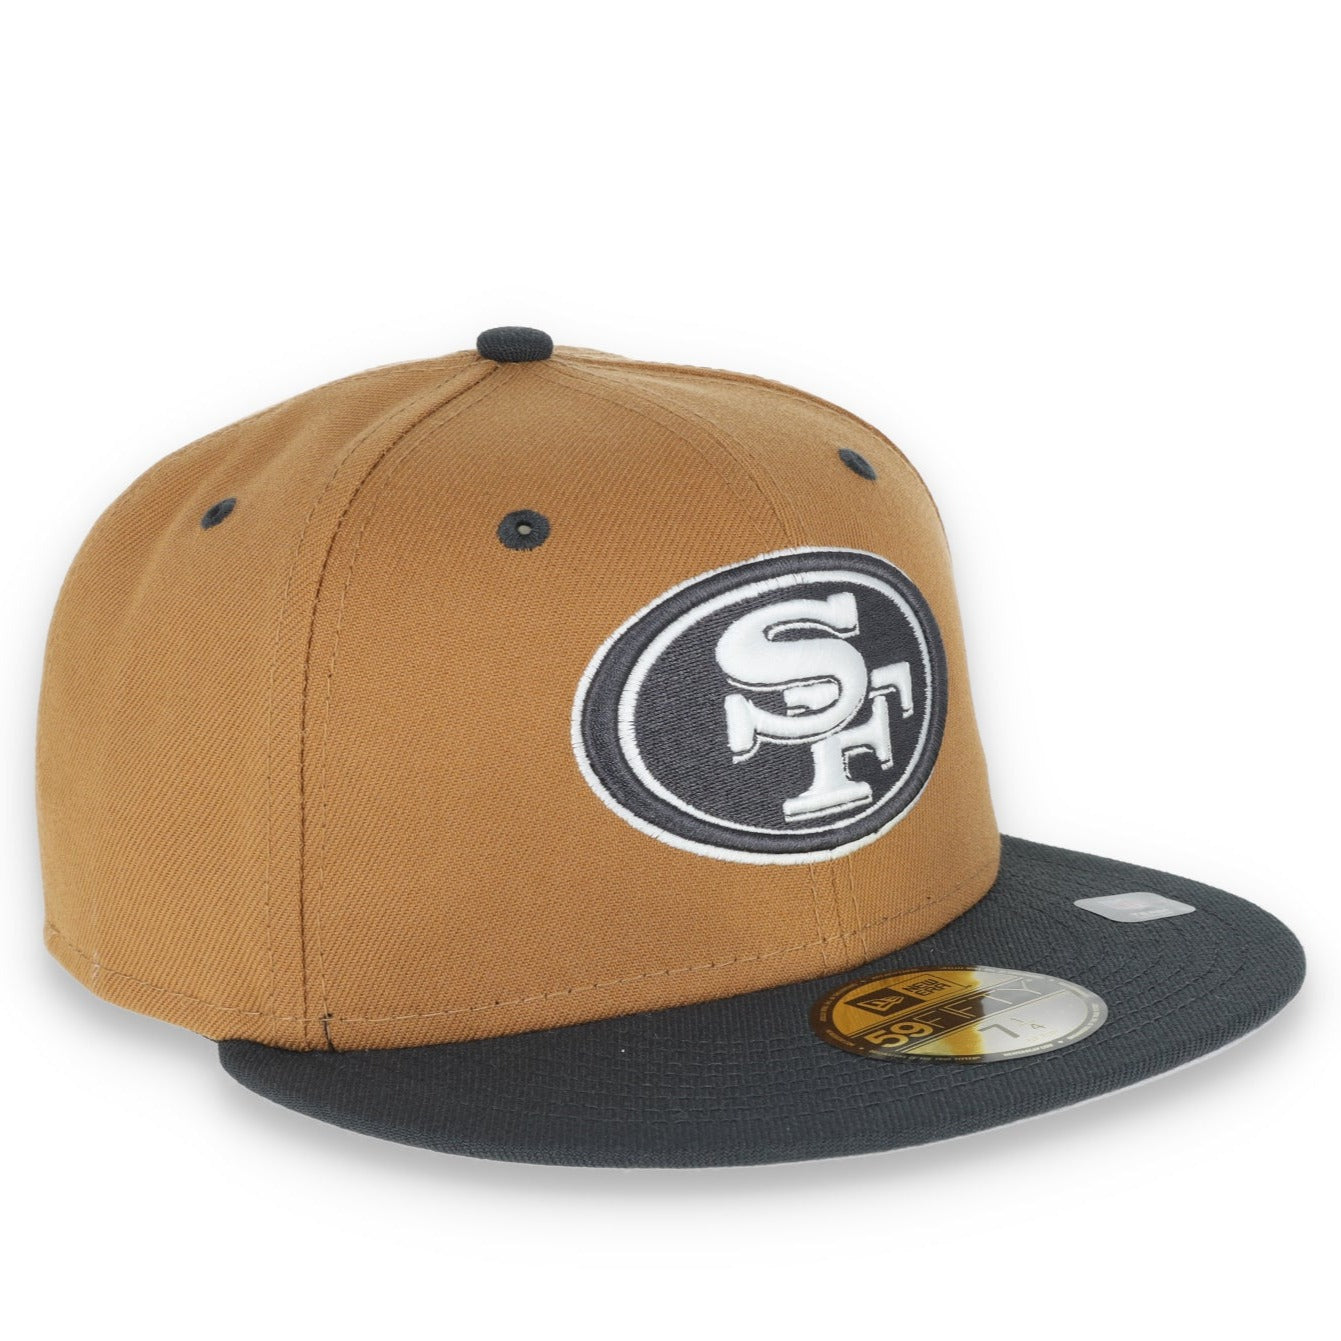 New Era San Francisco 49ers 2-Tone Color Pack 9FIFTY Snapback Hat-Brown/Charcoal